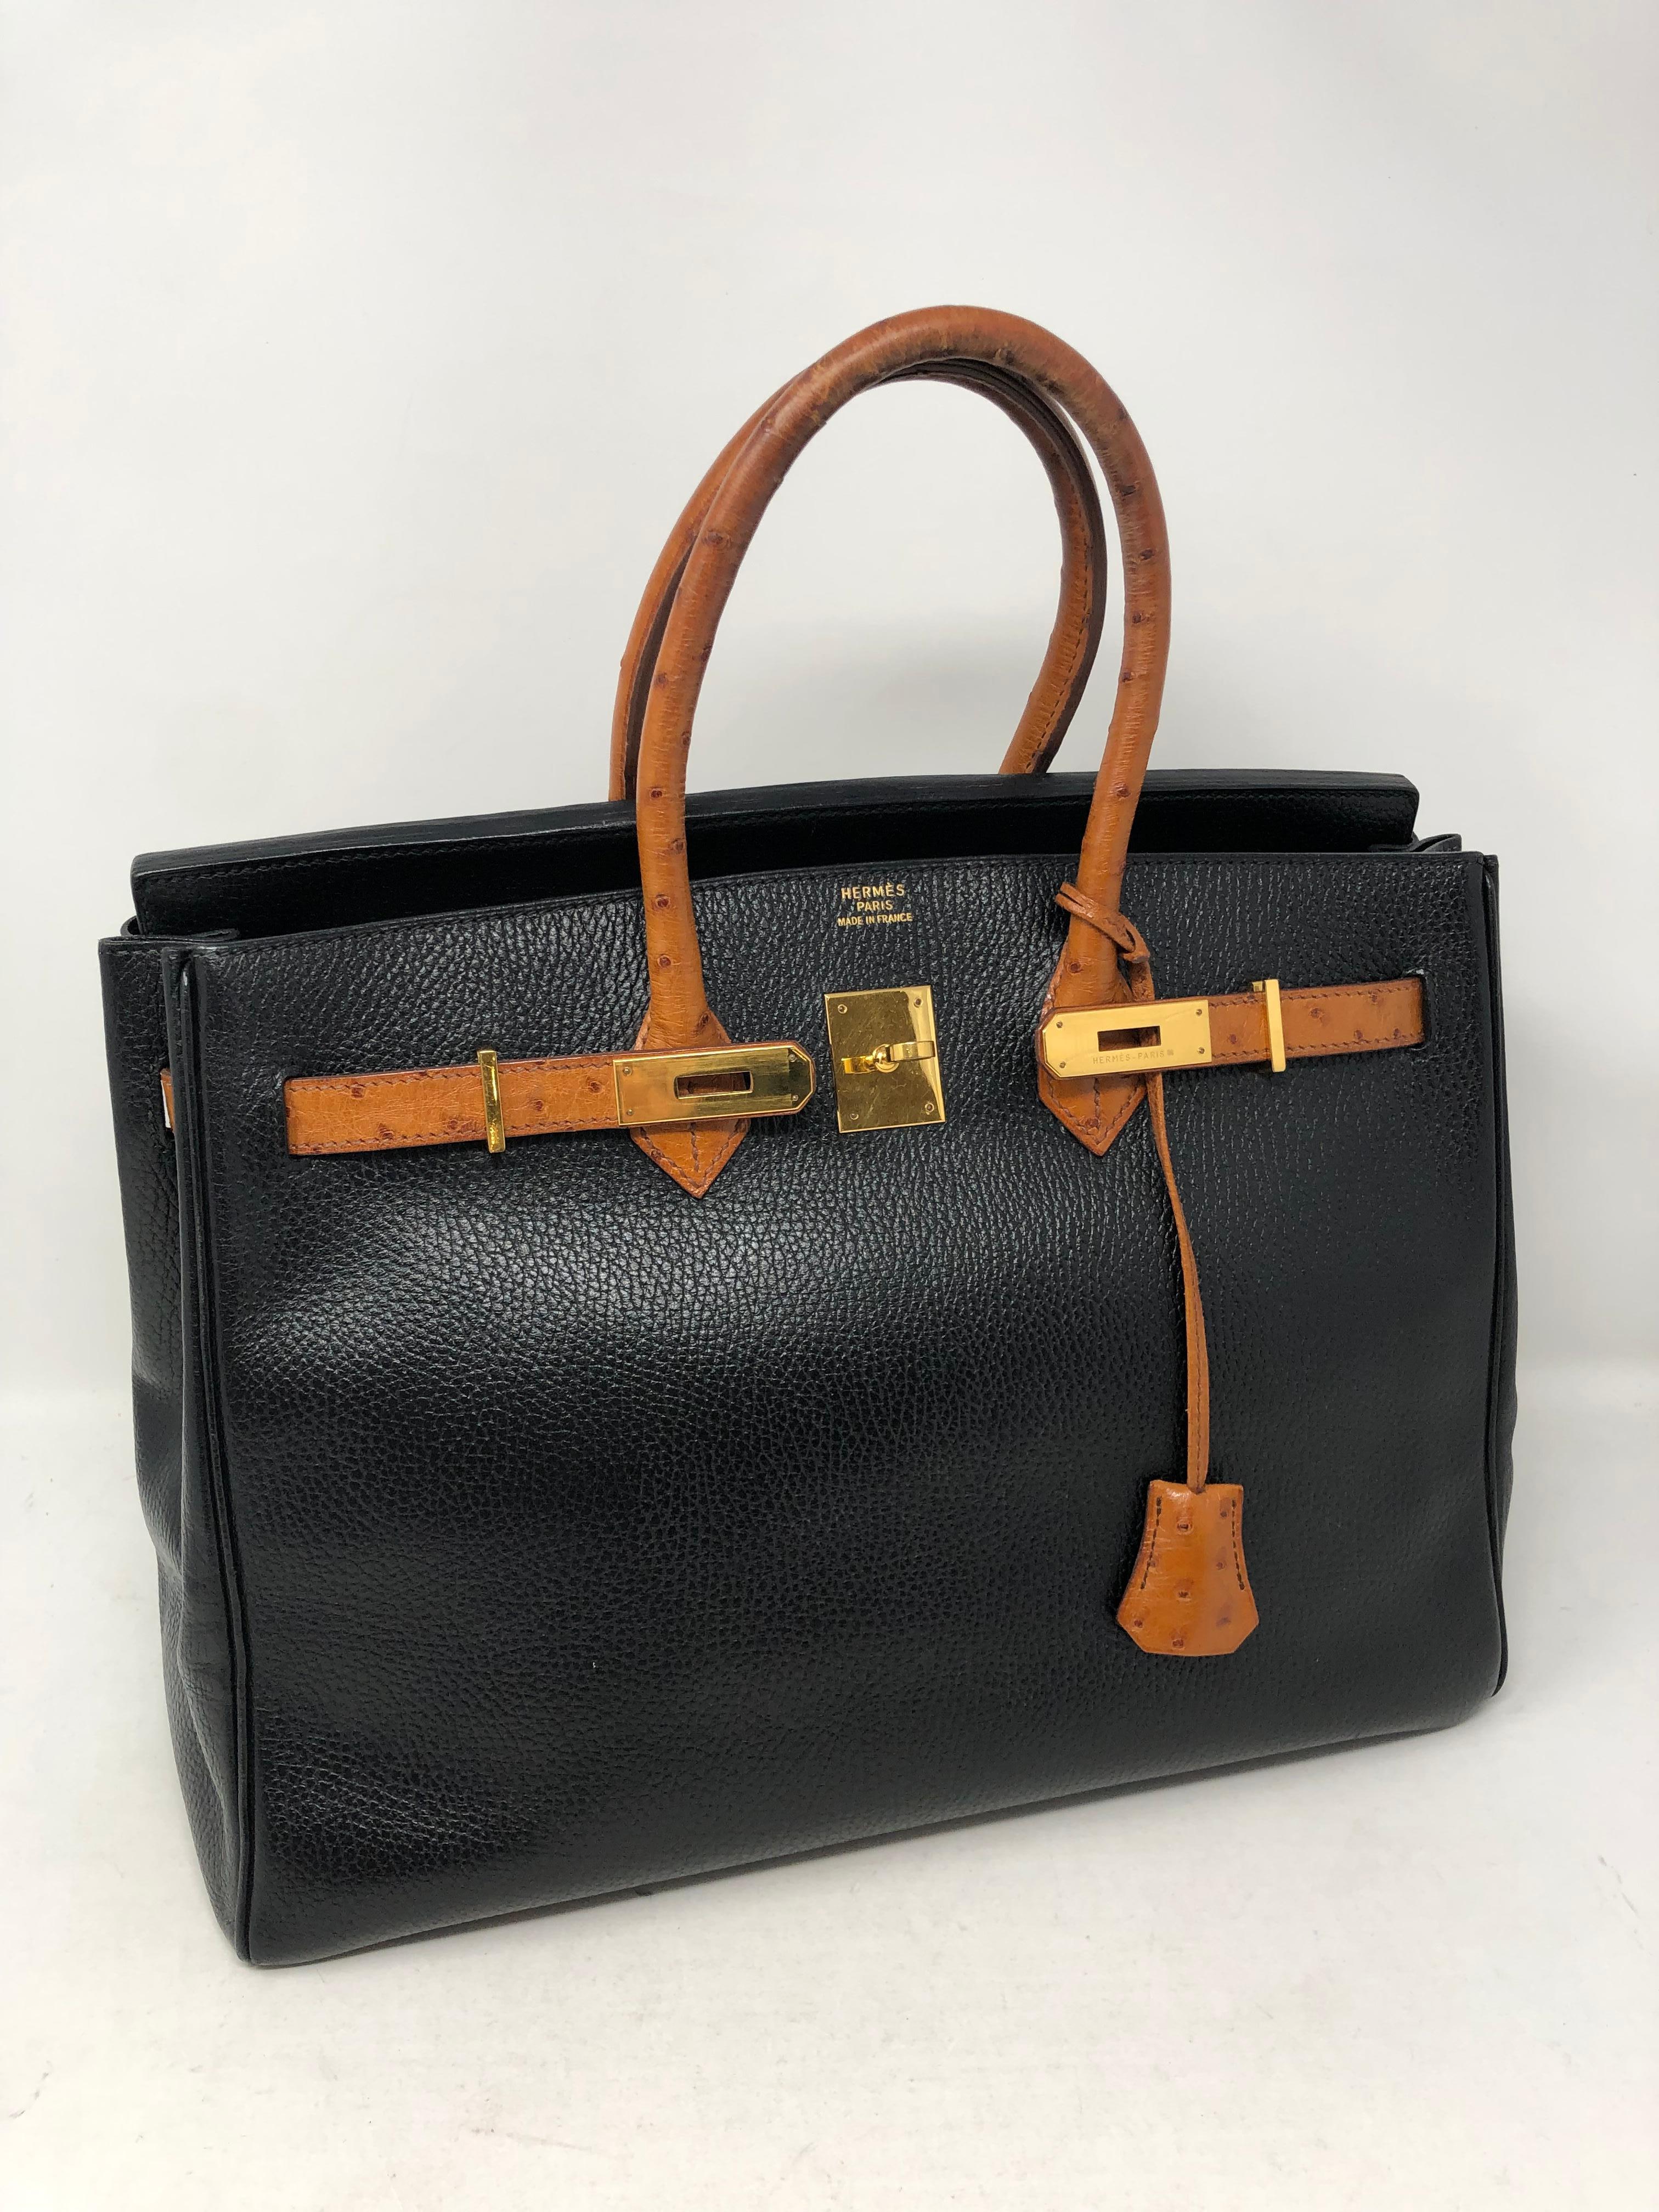 Hermes Birkin 35 Black with Ostrich Leather Handles and Trim. Gold hardware. Vintage from 1995. Rare Birkin. A beautiful and unique piece that is hard to find. Black leather in great condition. The ostrich handles have some wear and can be reglazed